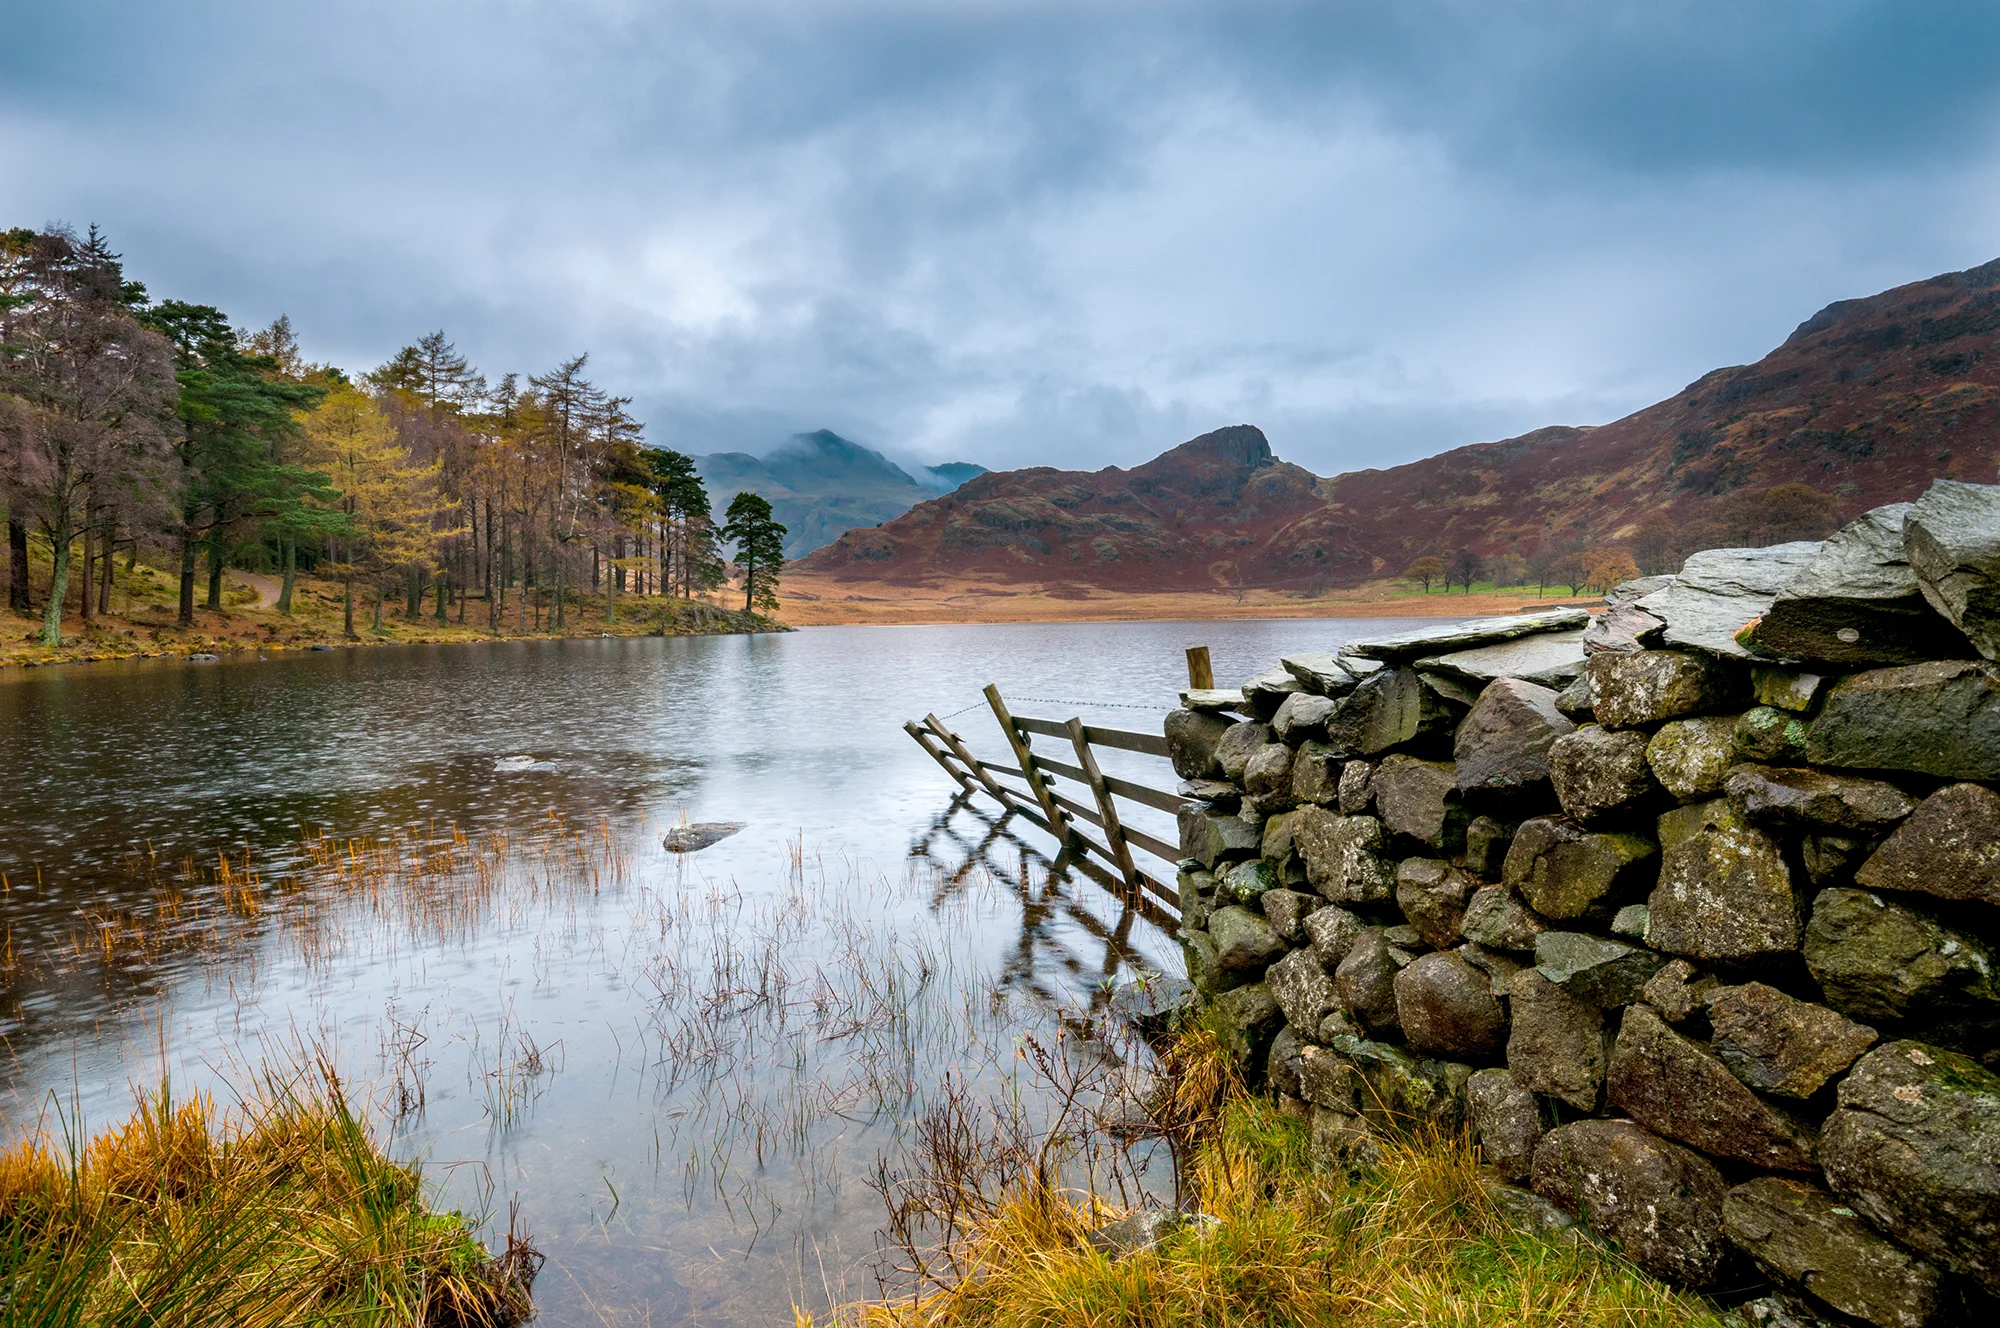 Stone wall leading into a lake with forest and cloud topped hills in distance on a rainy day